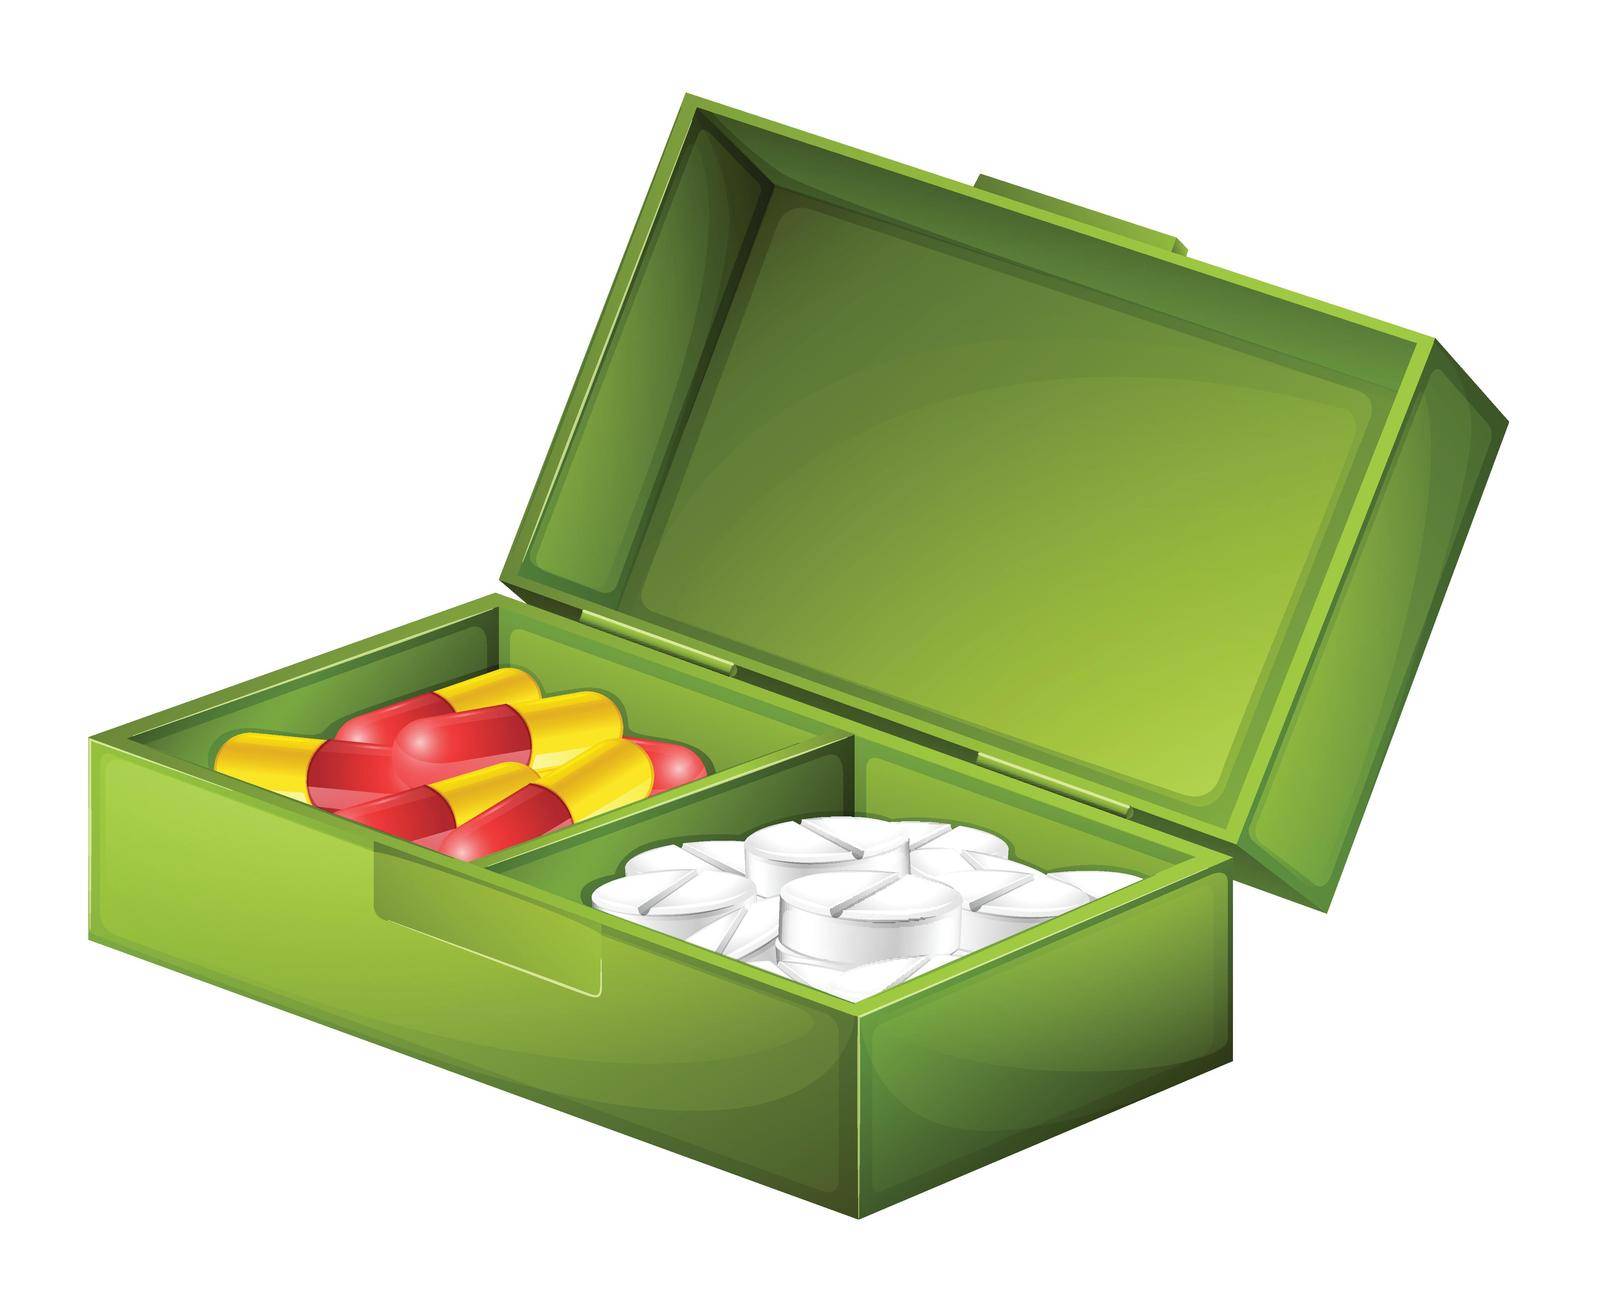 Illustration of a medicine box with tablets and capsules on a white background